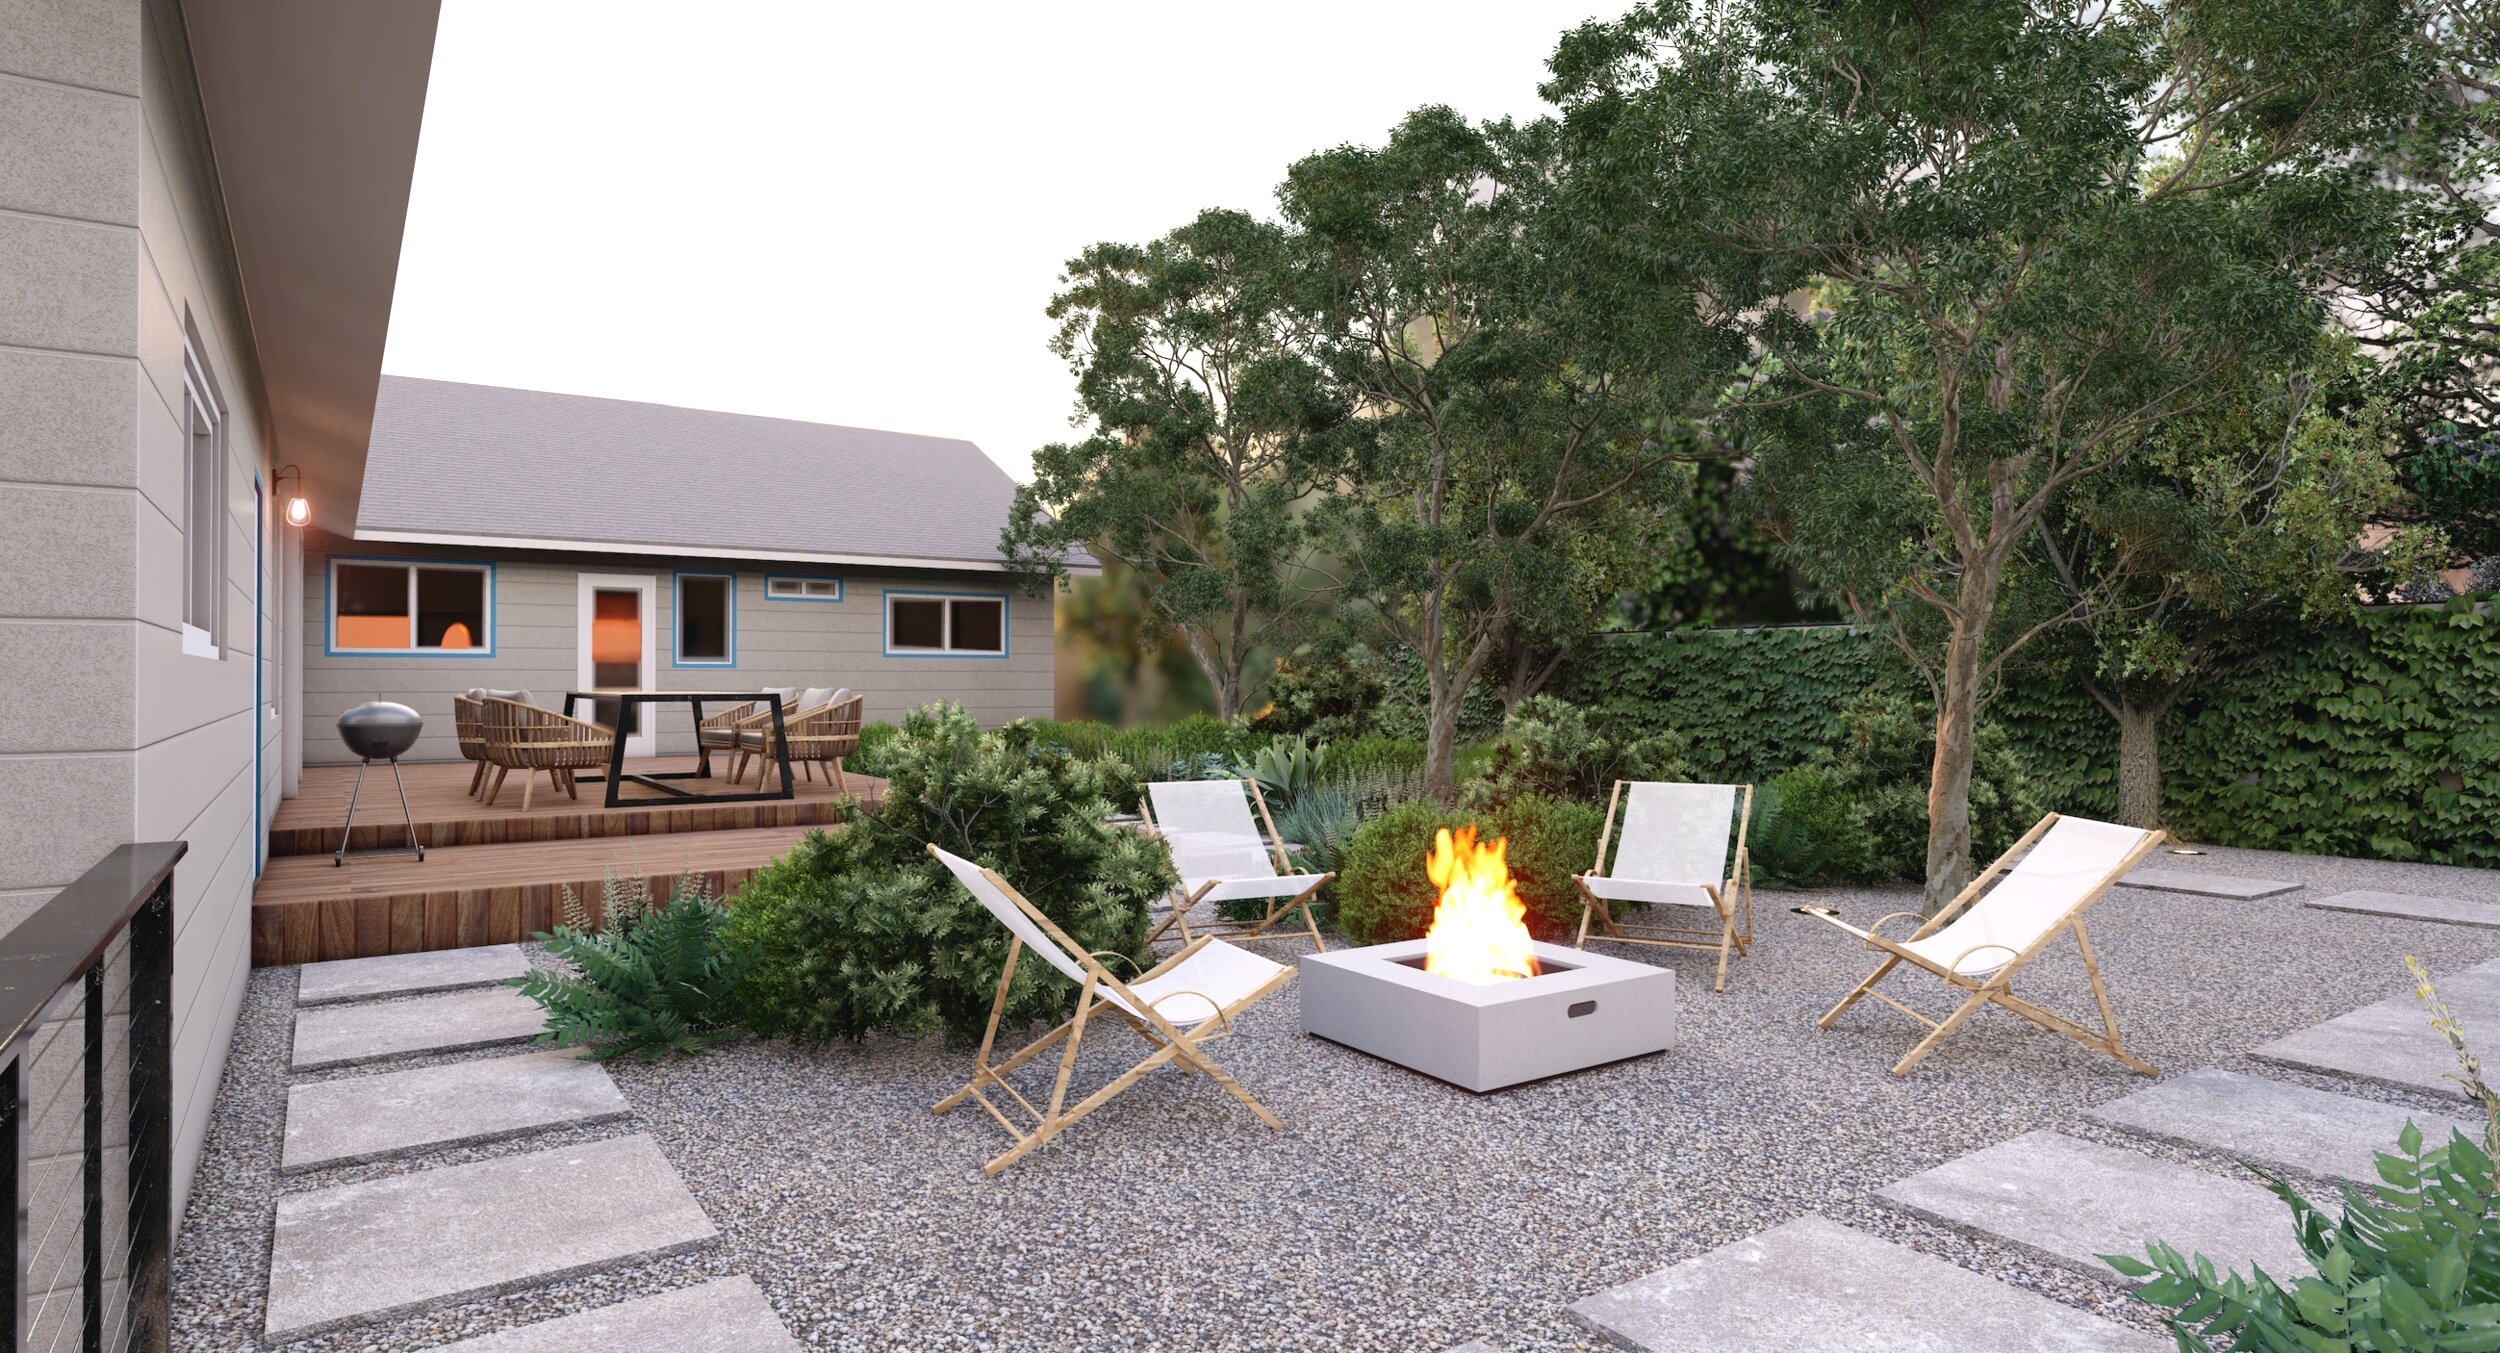 Social yard with a sitting area on a deck, a sitting area around a fire pit, and plants